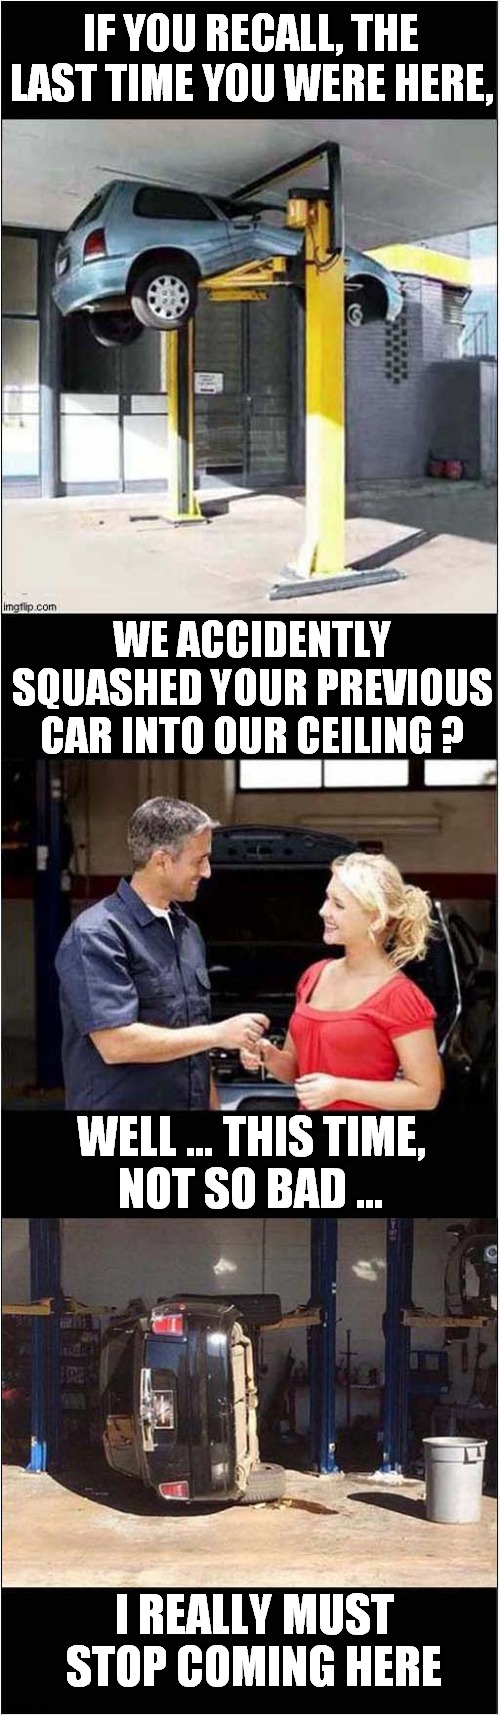 Customers Continuing Dissatisfaction | IF YOU RECALL, THE LAST TIME YOU WERE HERE, WE ACCIDENTLY SQUASHED YOUR PREVIOUS CAR INTO OUR CEILING ? WELL … THIS TIME, 
NOT SO BAD ... I REALLY MUST STOP COMING HERE | image tagged in garage,disaster | made w/ Imgflip meme maker